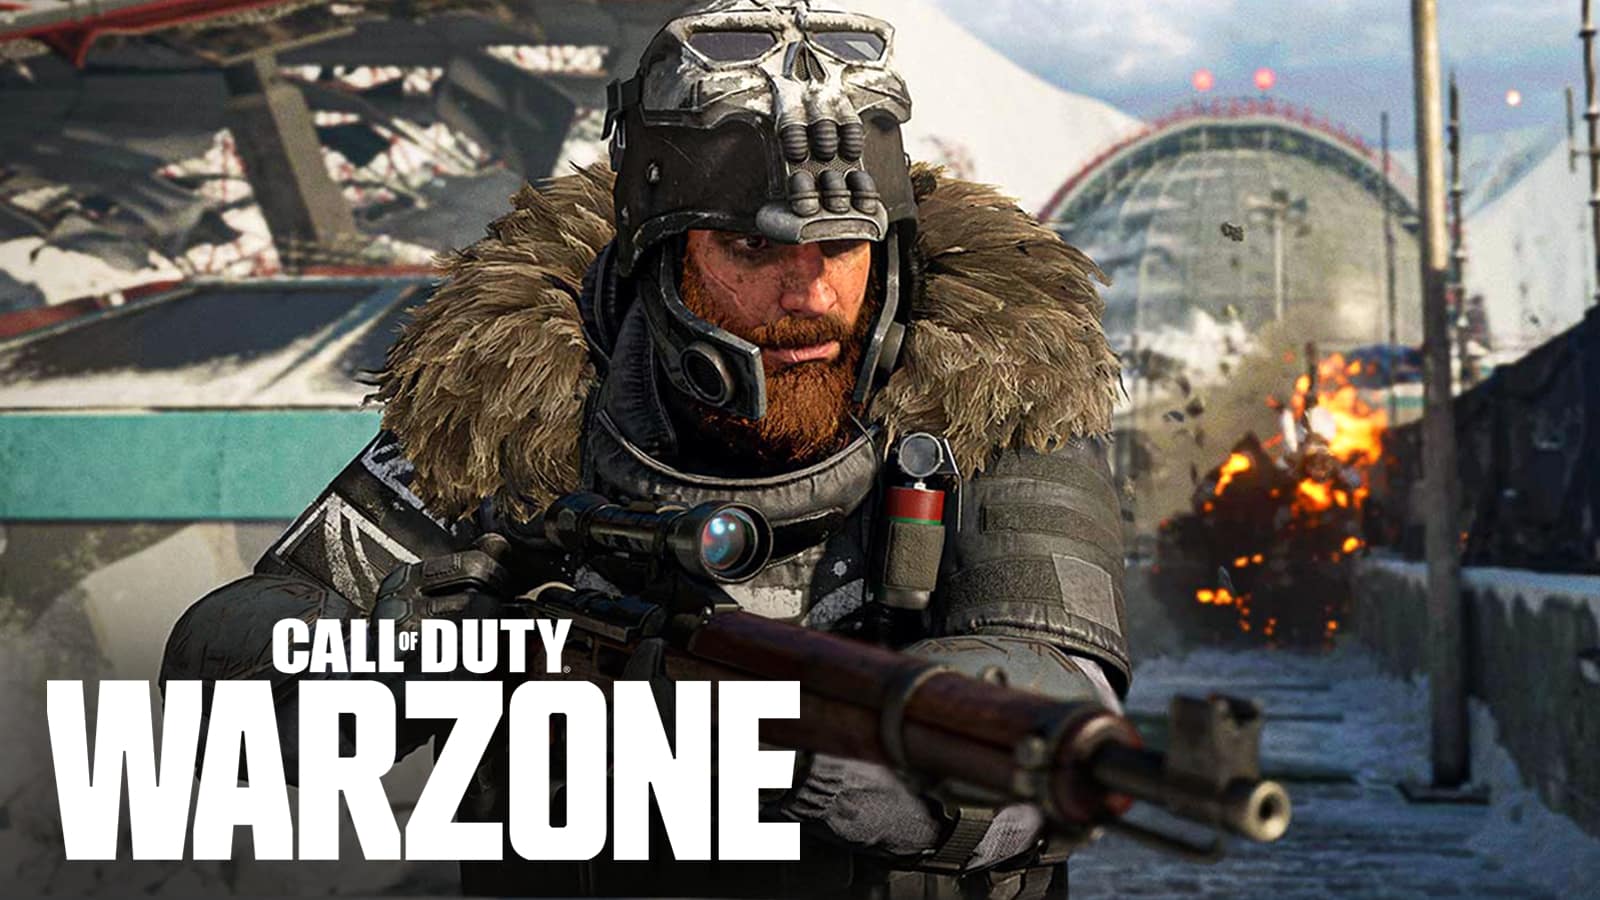 Raven Software is making two exclusive Warzone perks for Call of Duty battle royale.